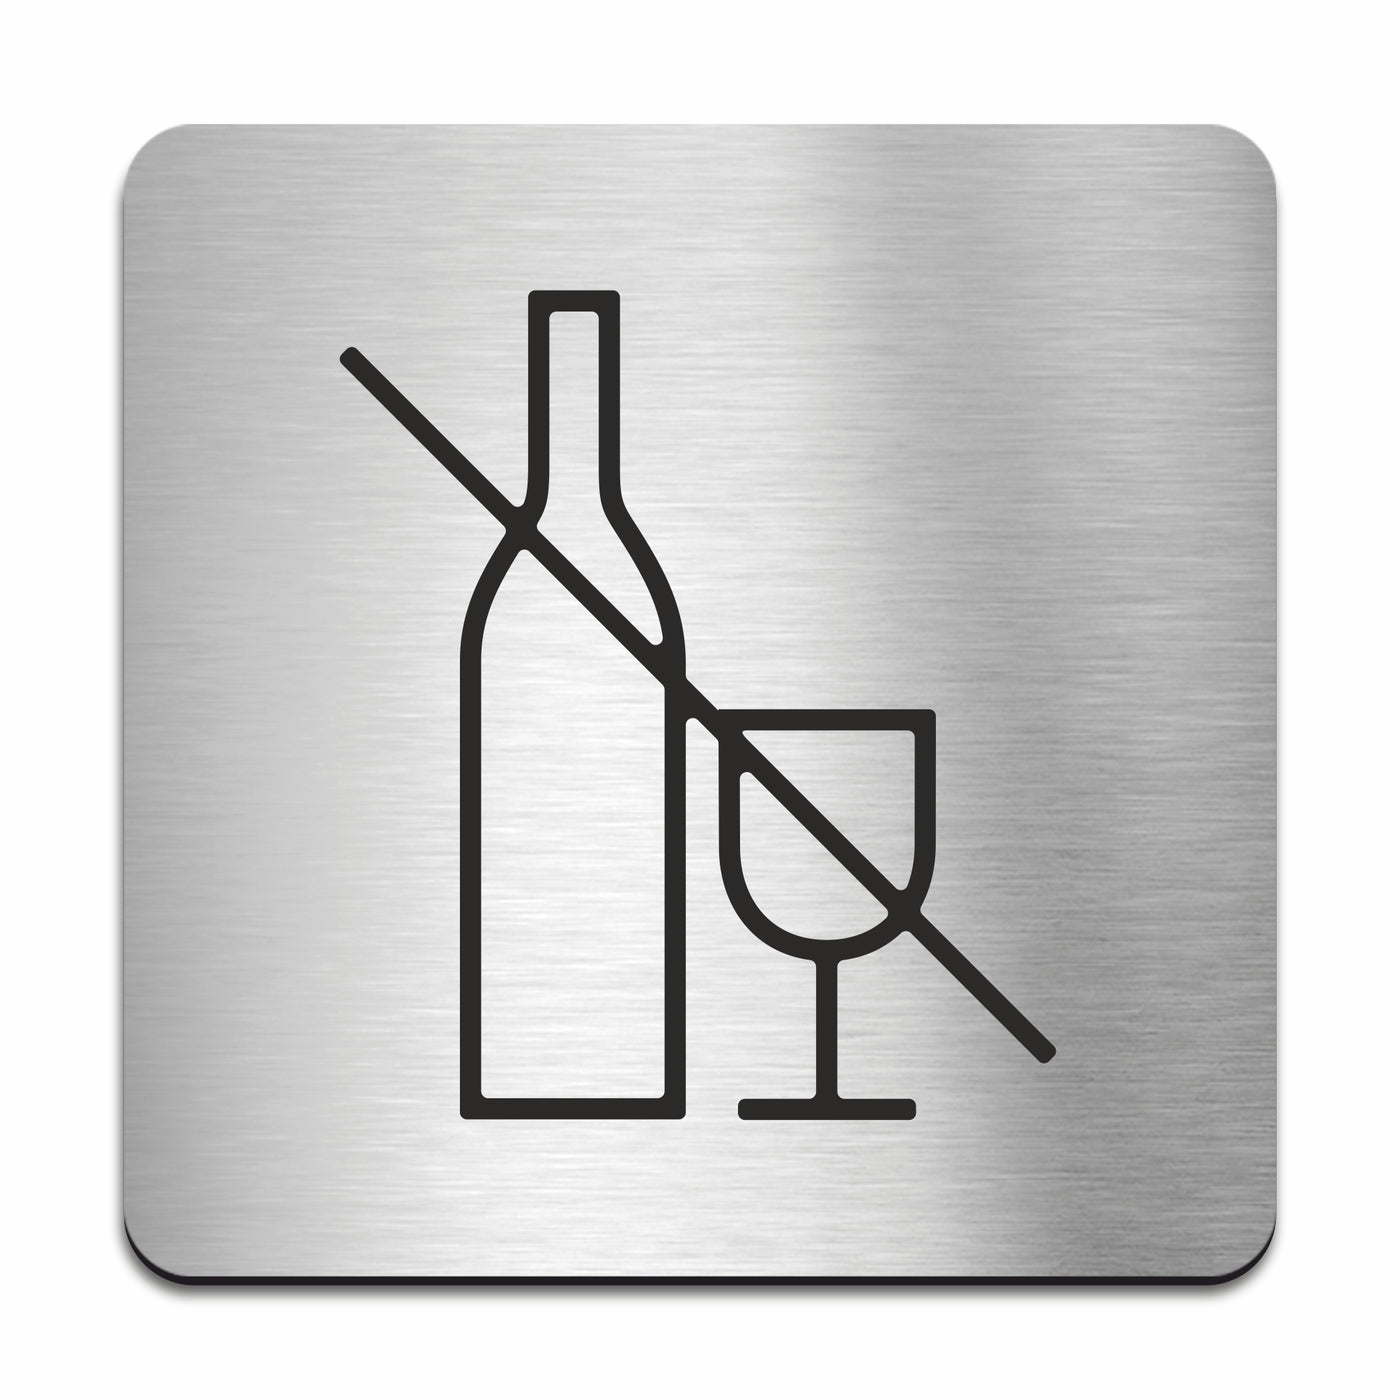 No Alcohol On Premises Sign | Alcohol Prohibition Sign - Stainless steel